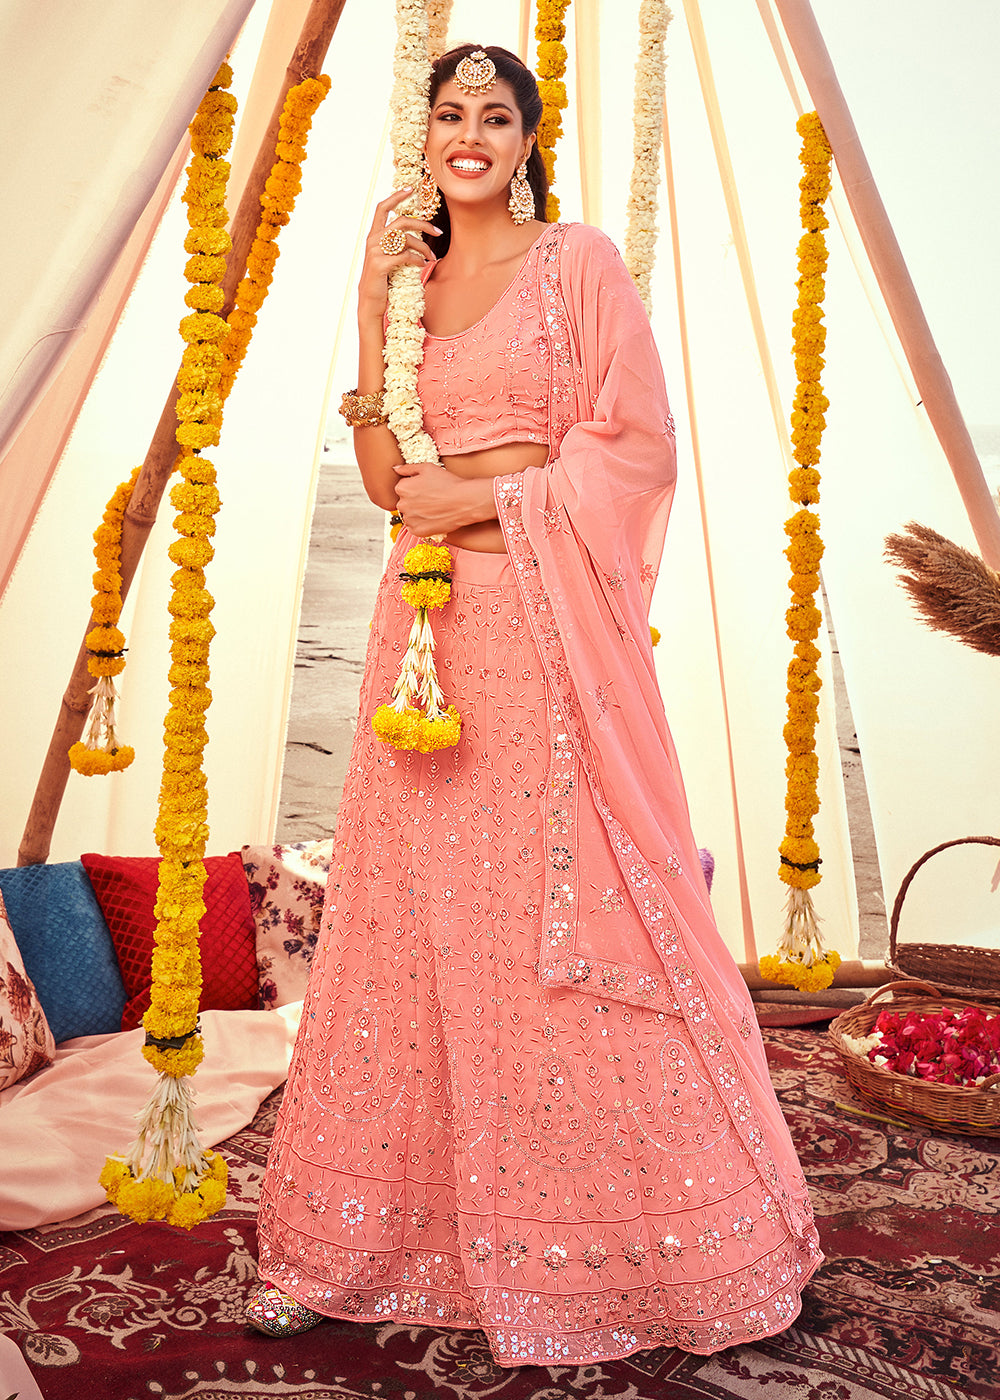 Buy Now Precious Pink Sequined Wedding Function Wear Lehenga Choli Online in USA, UK, Canada & Worldwide at Empress Clothing.